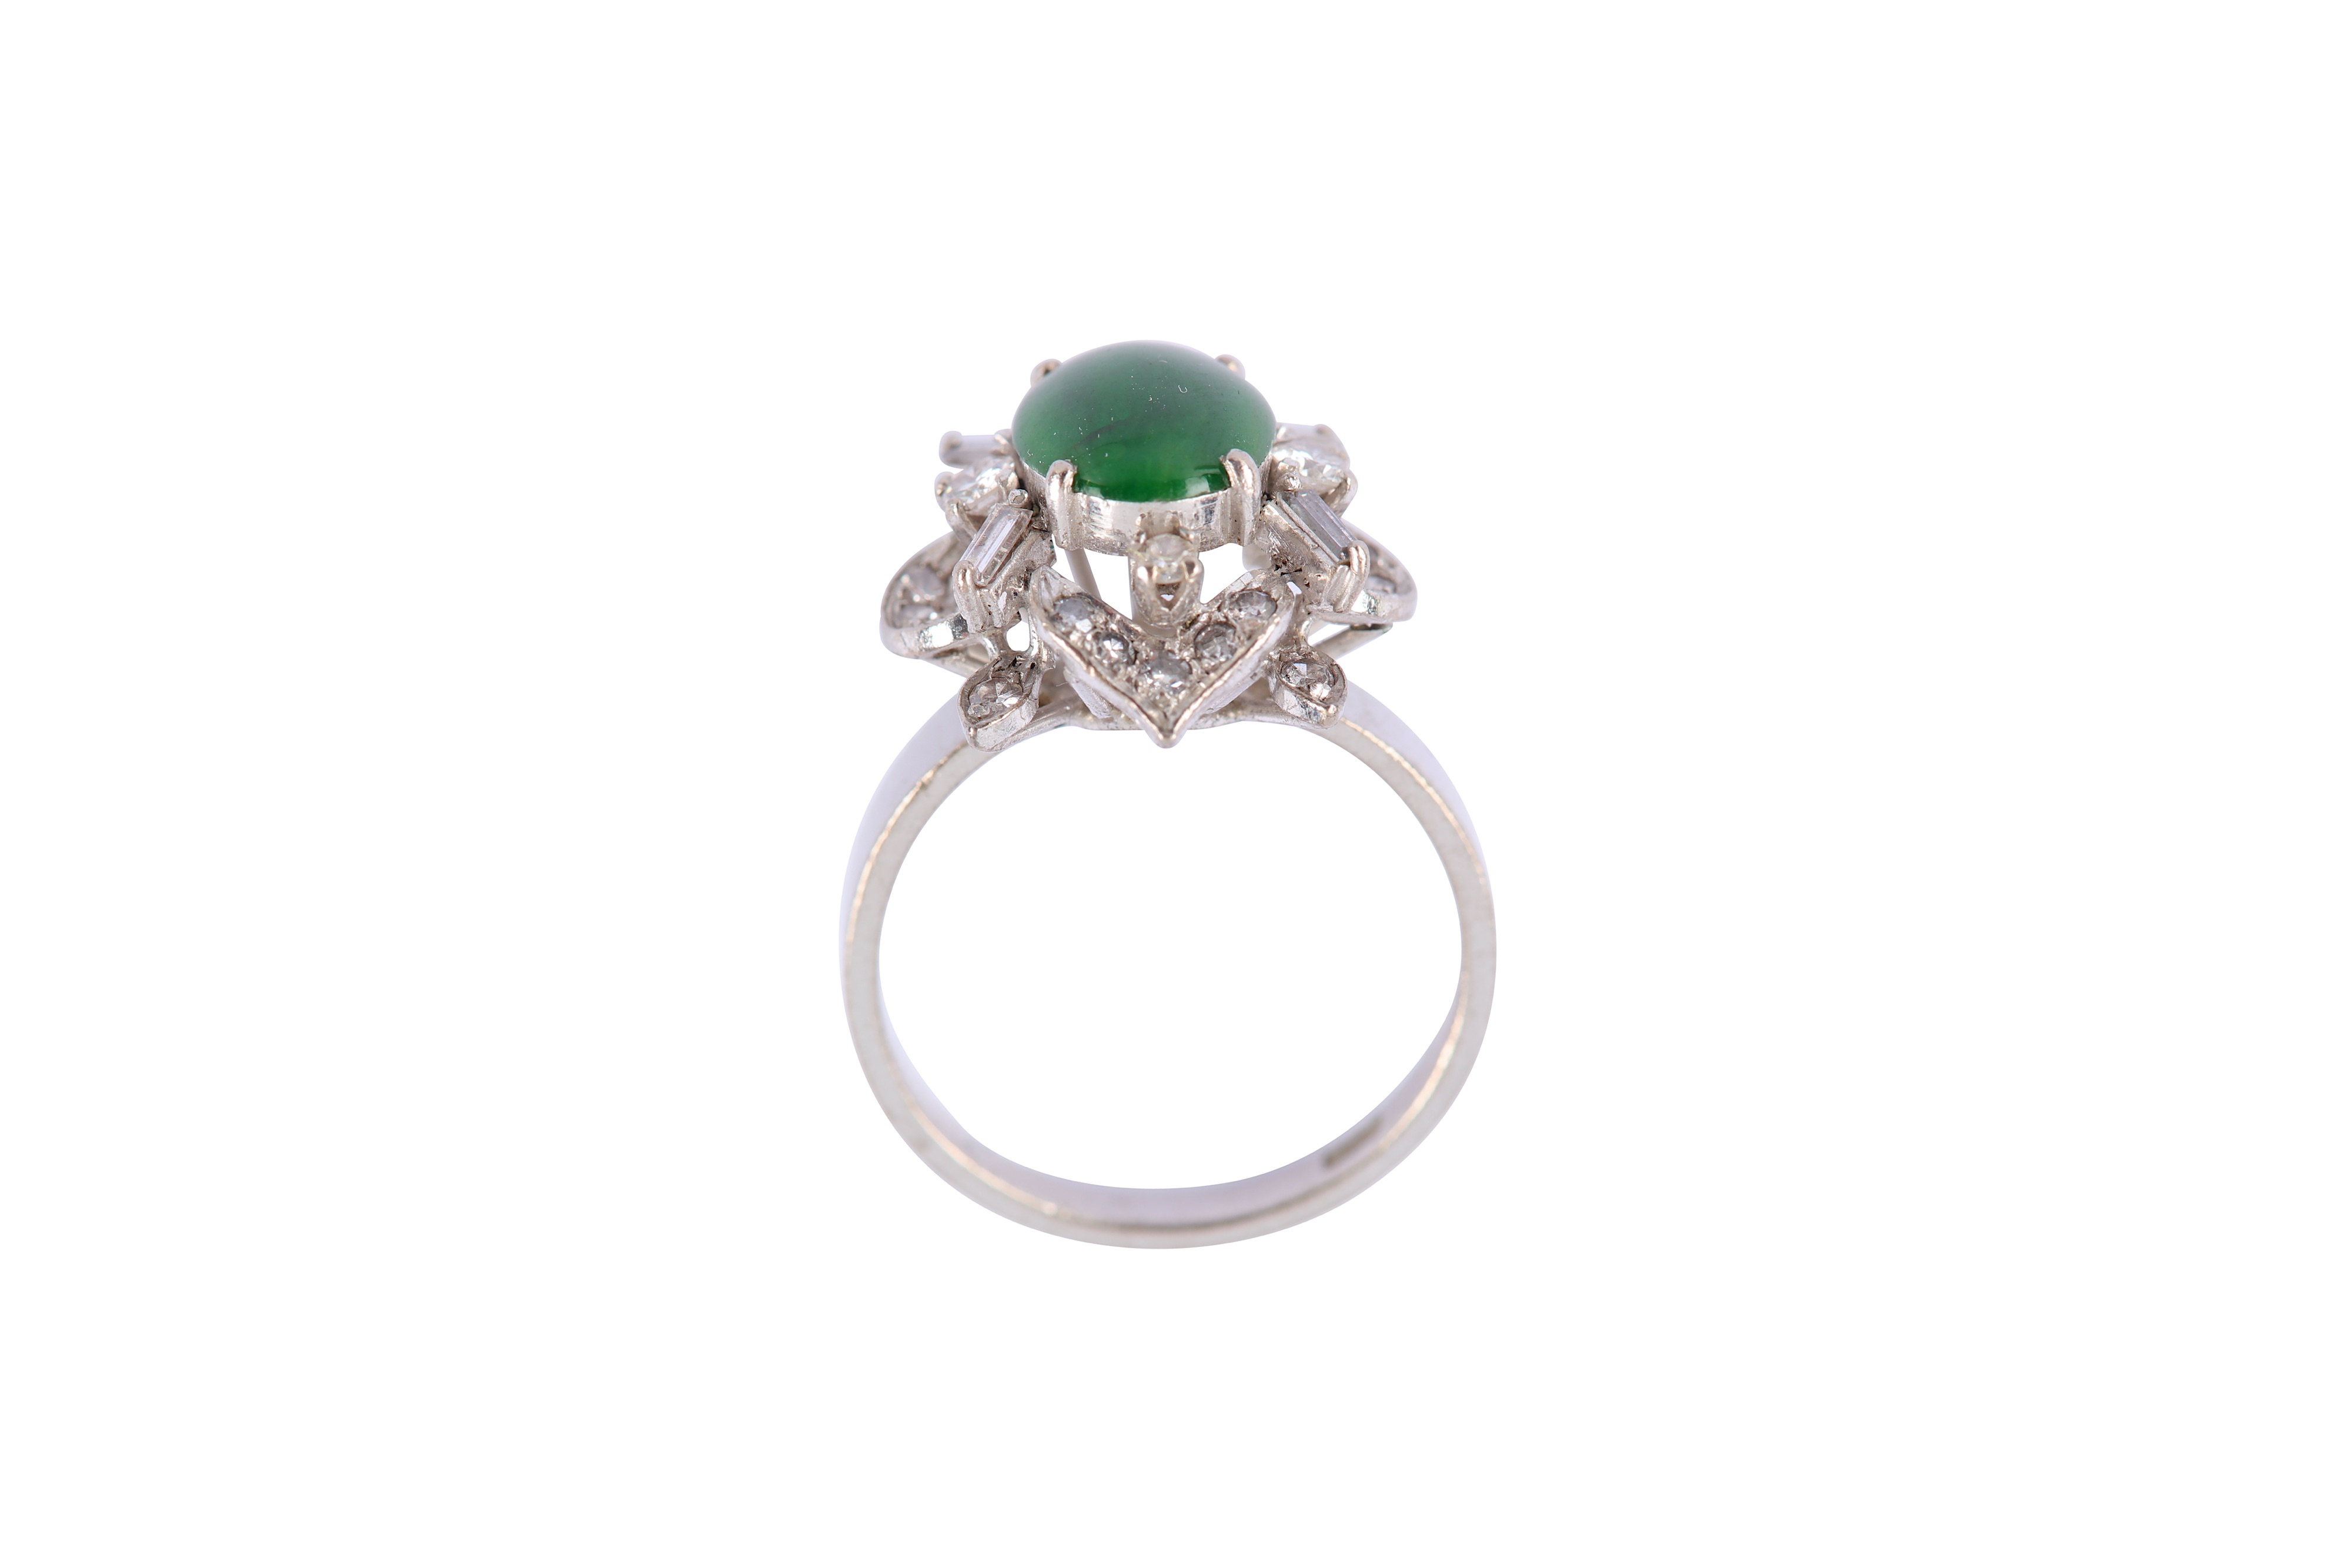 A jade and diamond ring - Image 3 of 5